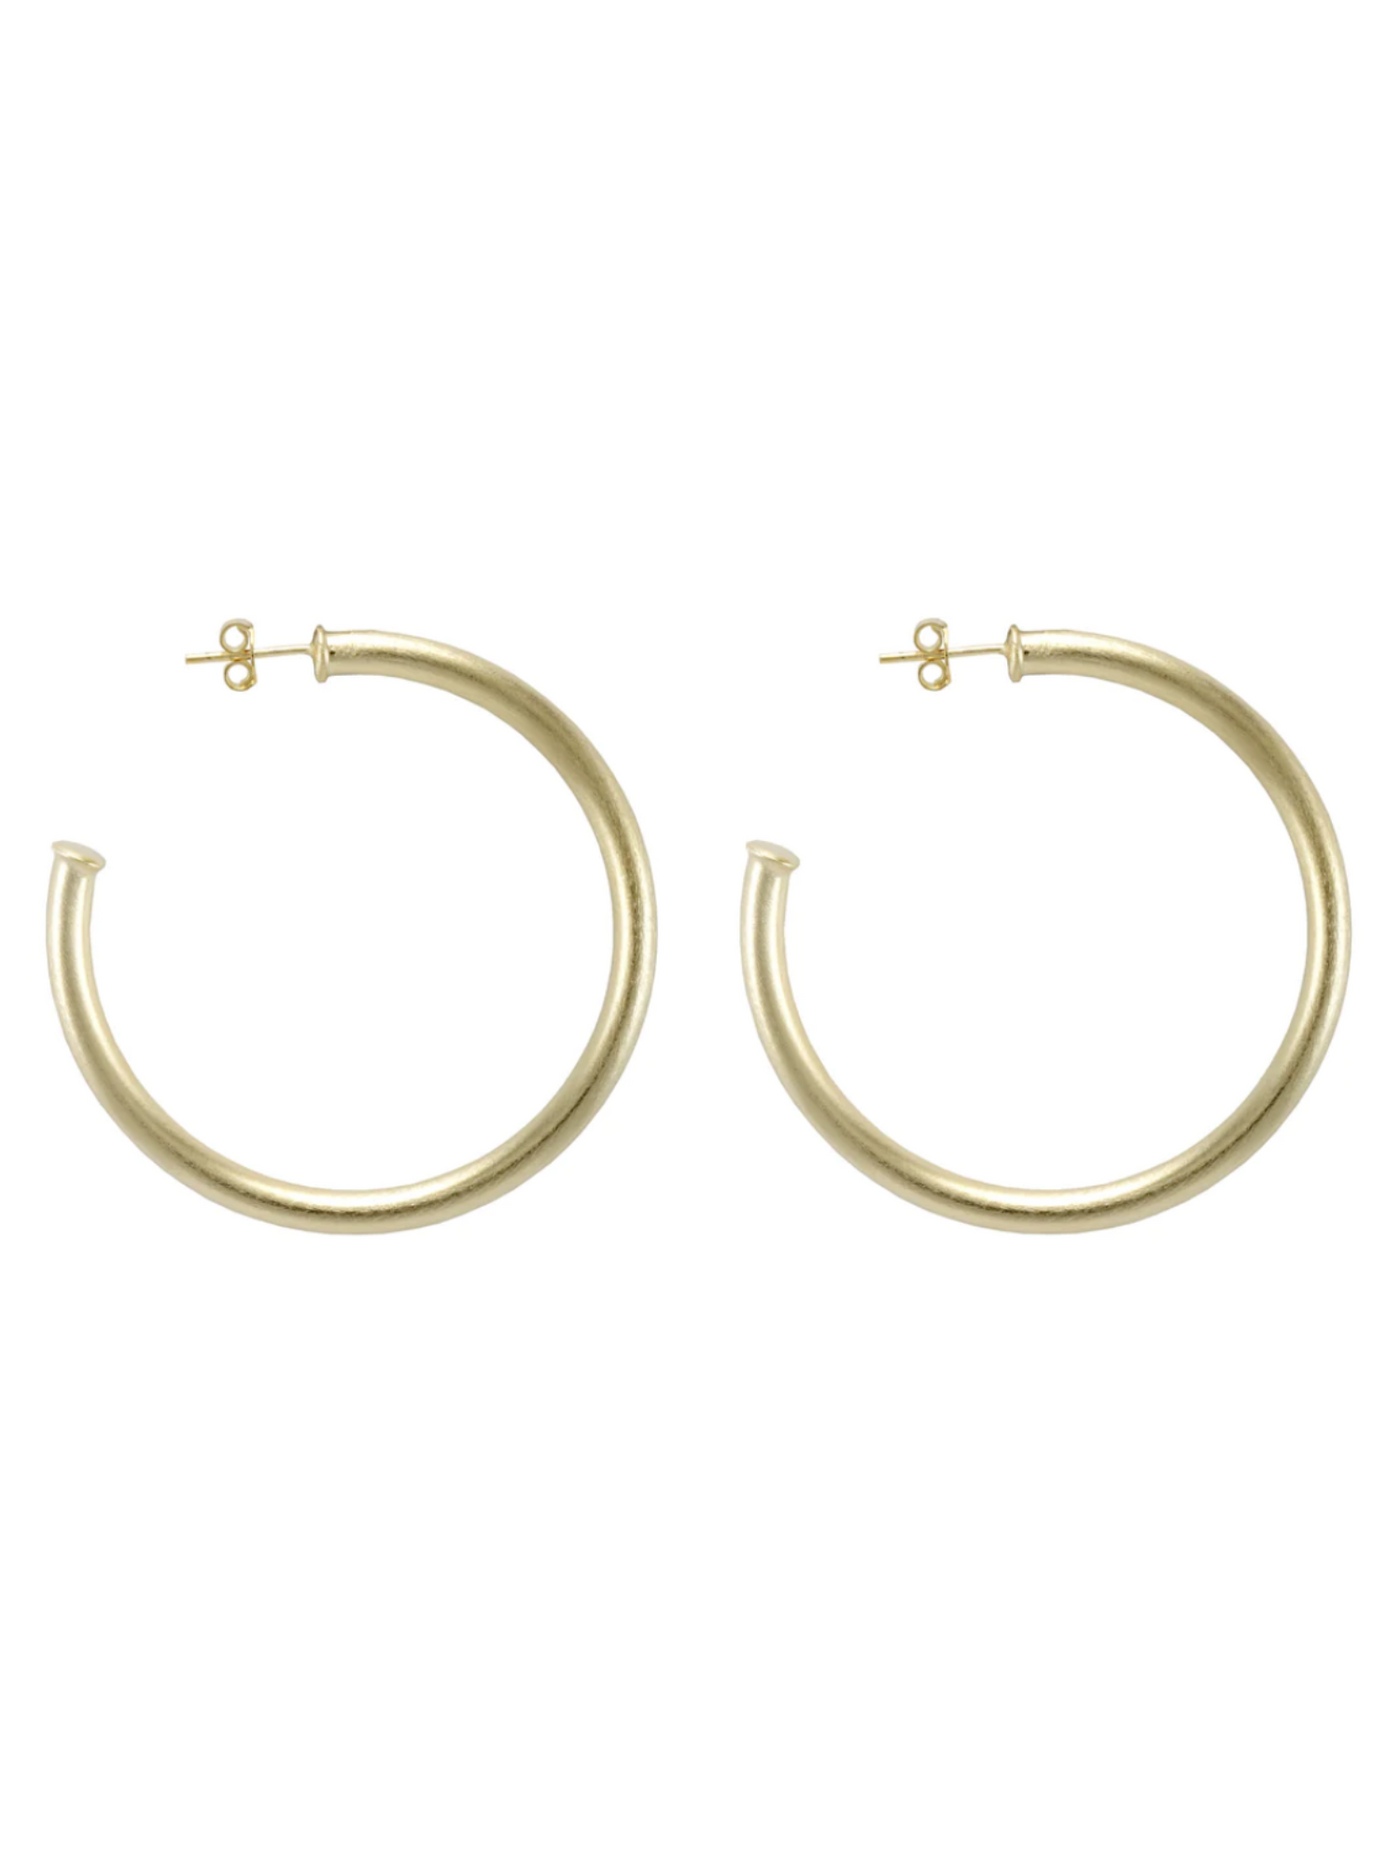 Shelia Fajl Small Everybody's Favorite Hoops in brushed gold on white background.